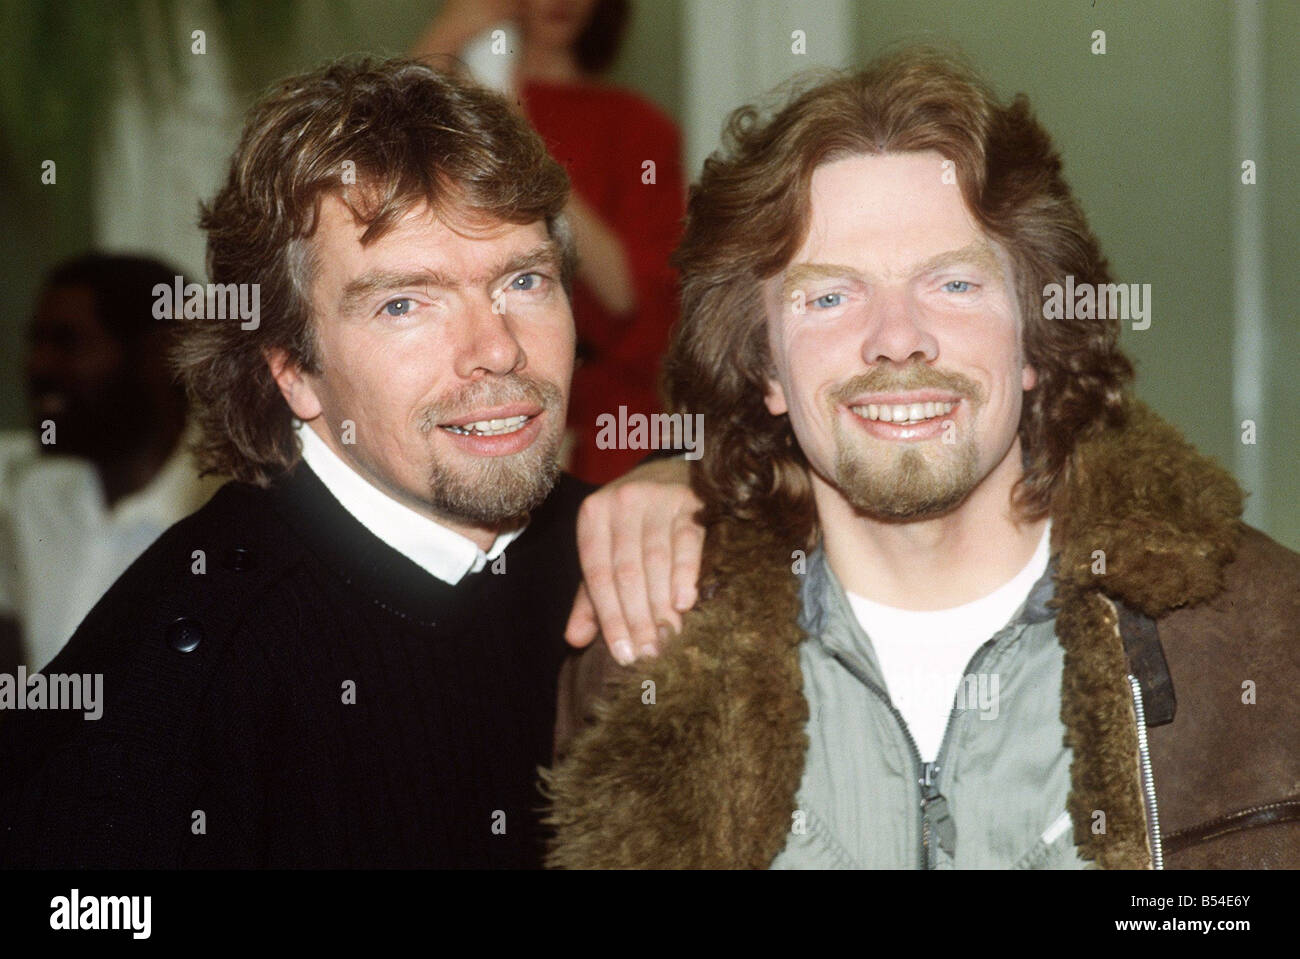 Richard Branson entrepreneur at Madame Tussauds with a waxwork model of himself Dbase MSI Stock Photo